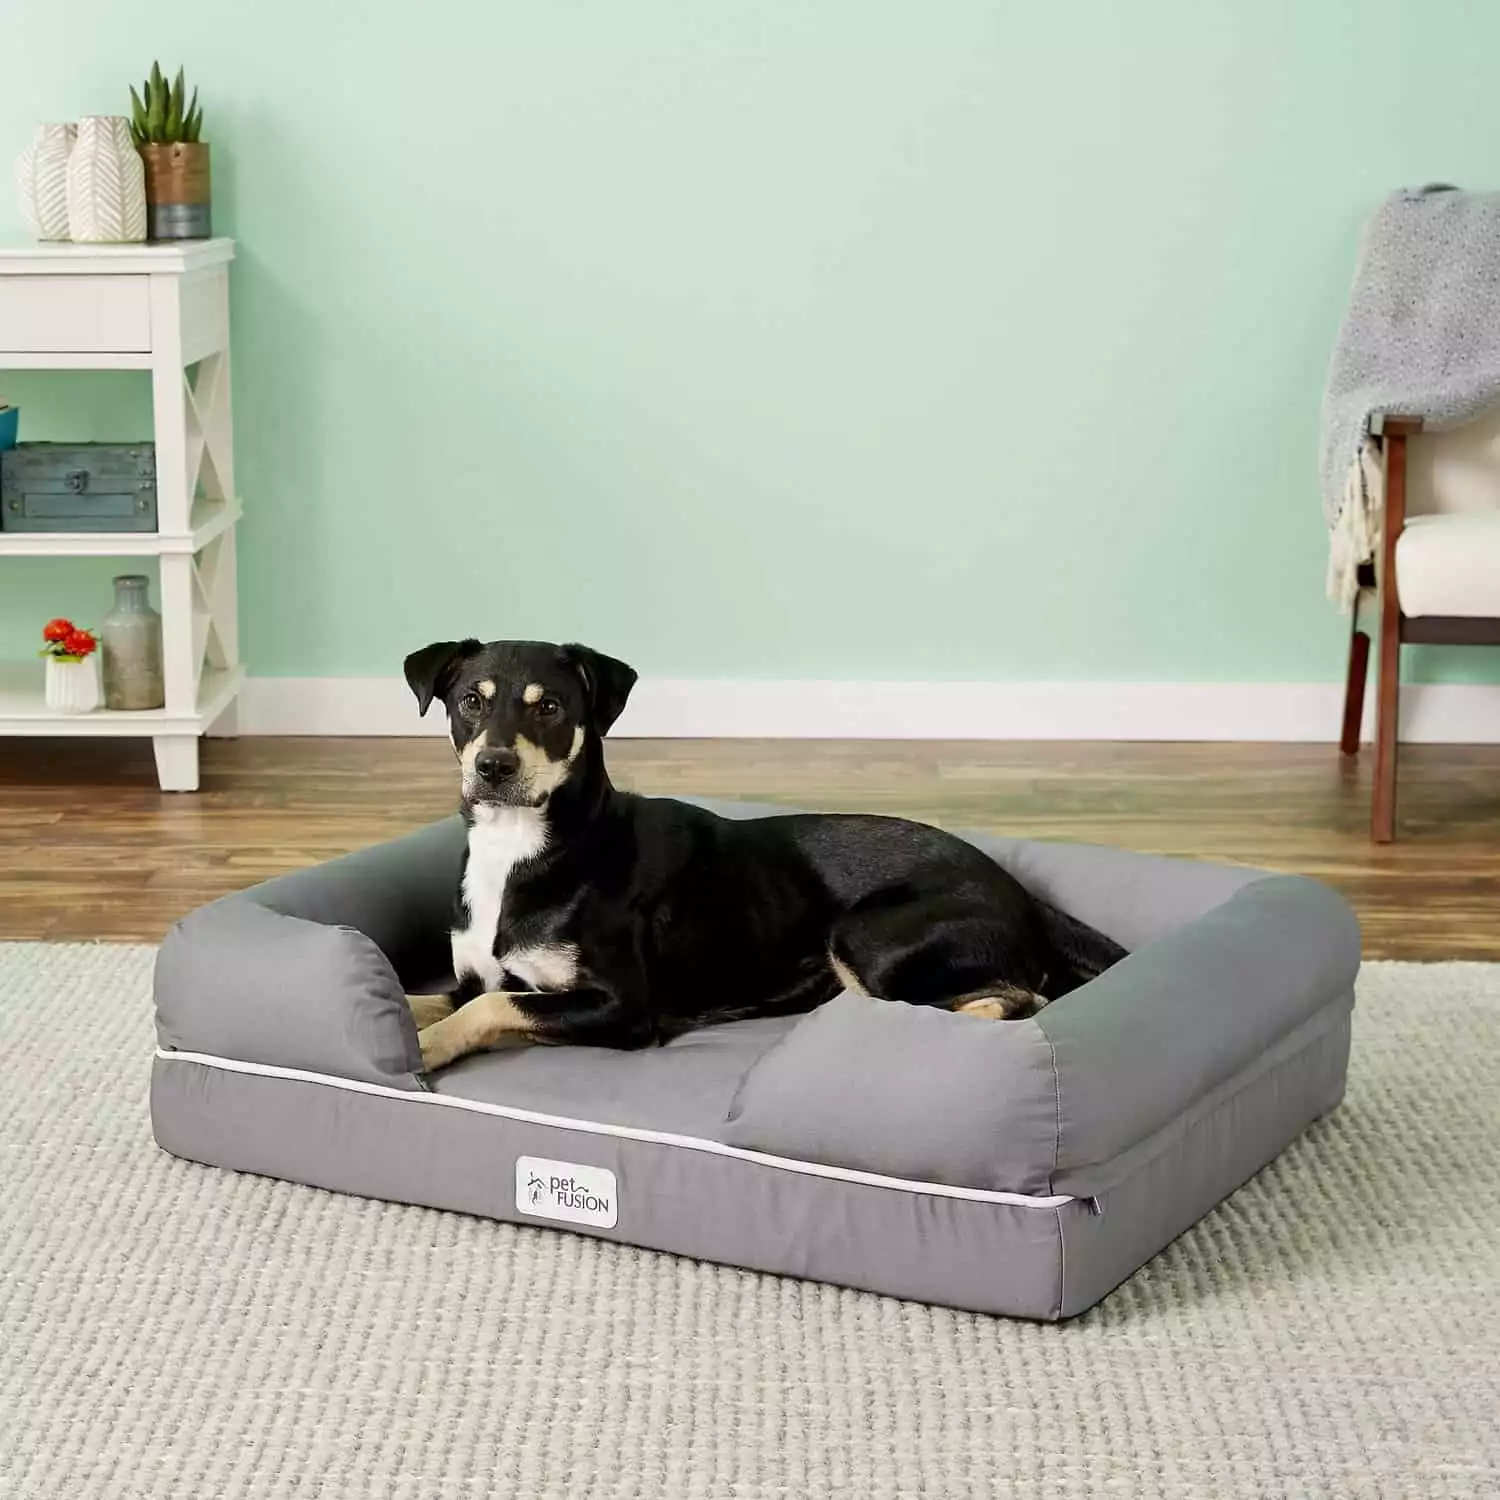 Pet Fusion Ultimate Dog Bed